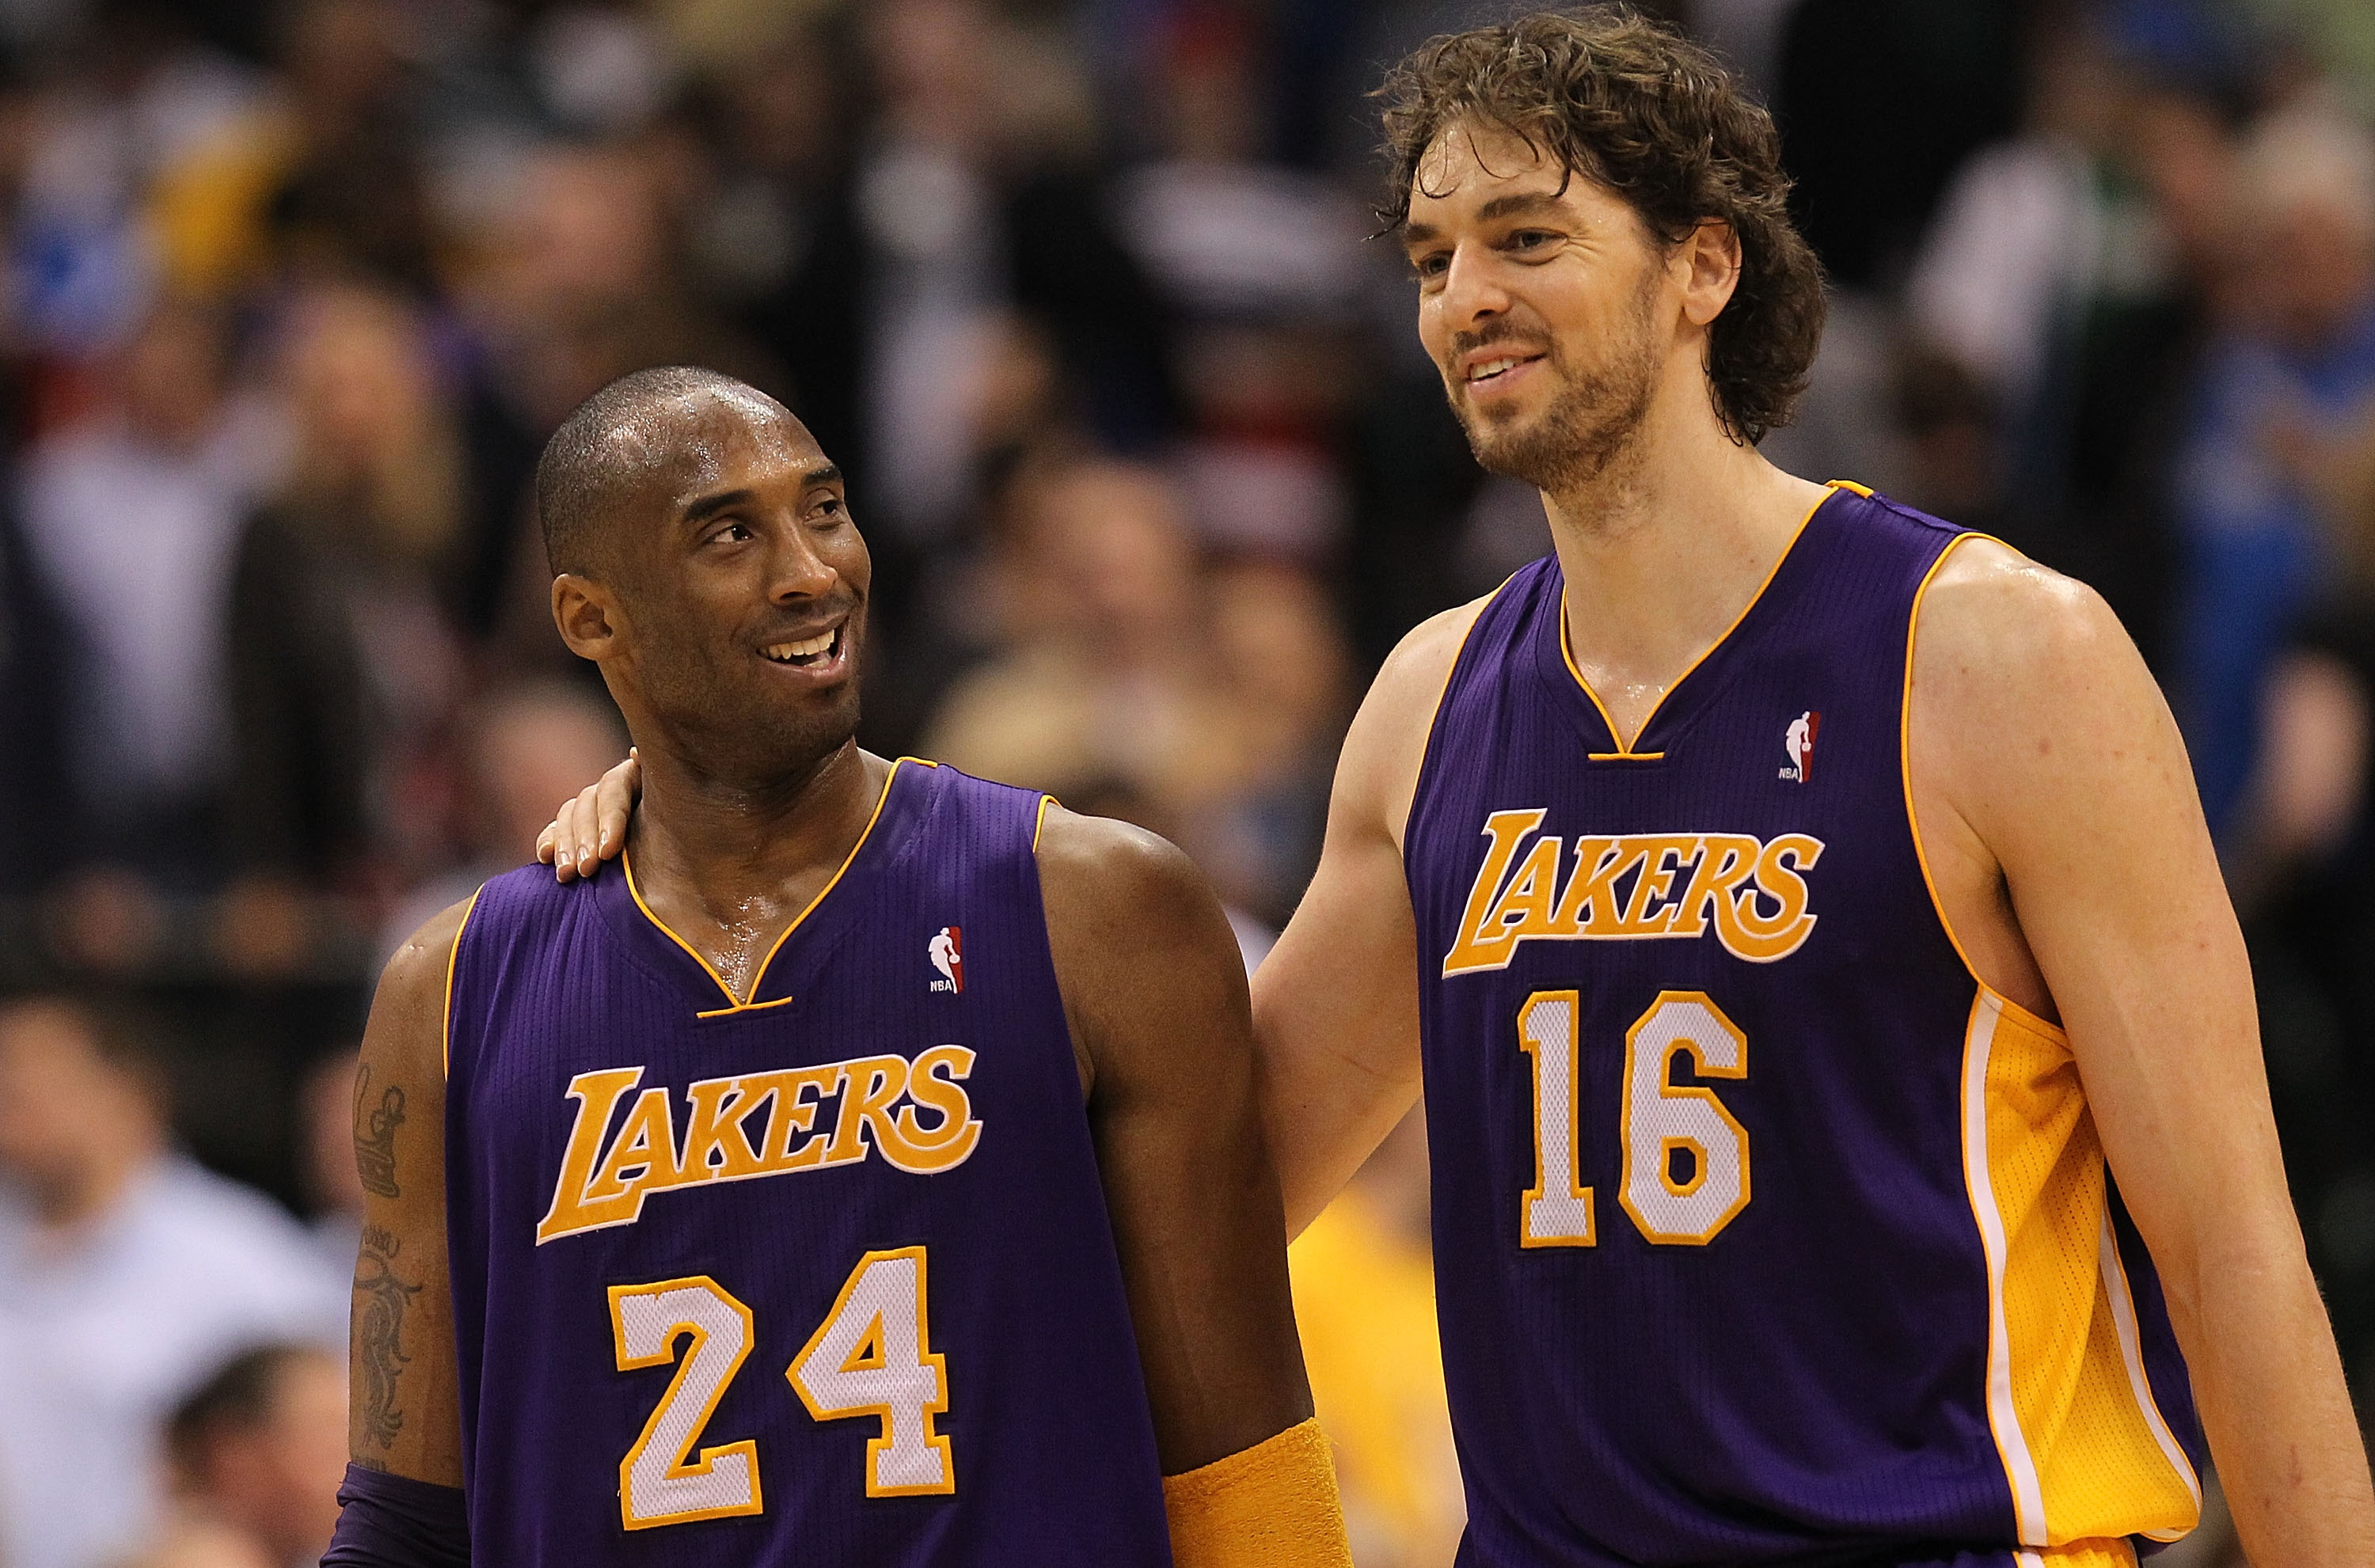 DALLAS, TX - MARCH 12:  Kobe Bryant #24 and Pau Gasol #16 of the Los Angeles Lakers react after a 96-91 win against the Dallas Mavericks at American Airlines Center on March 12, 2011 in Dallas, Texas.  NOTE TO USER: User expressly acknowledges and agrees